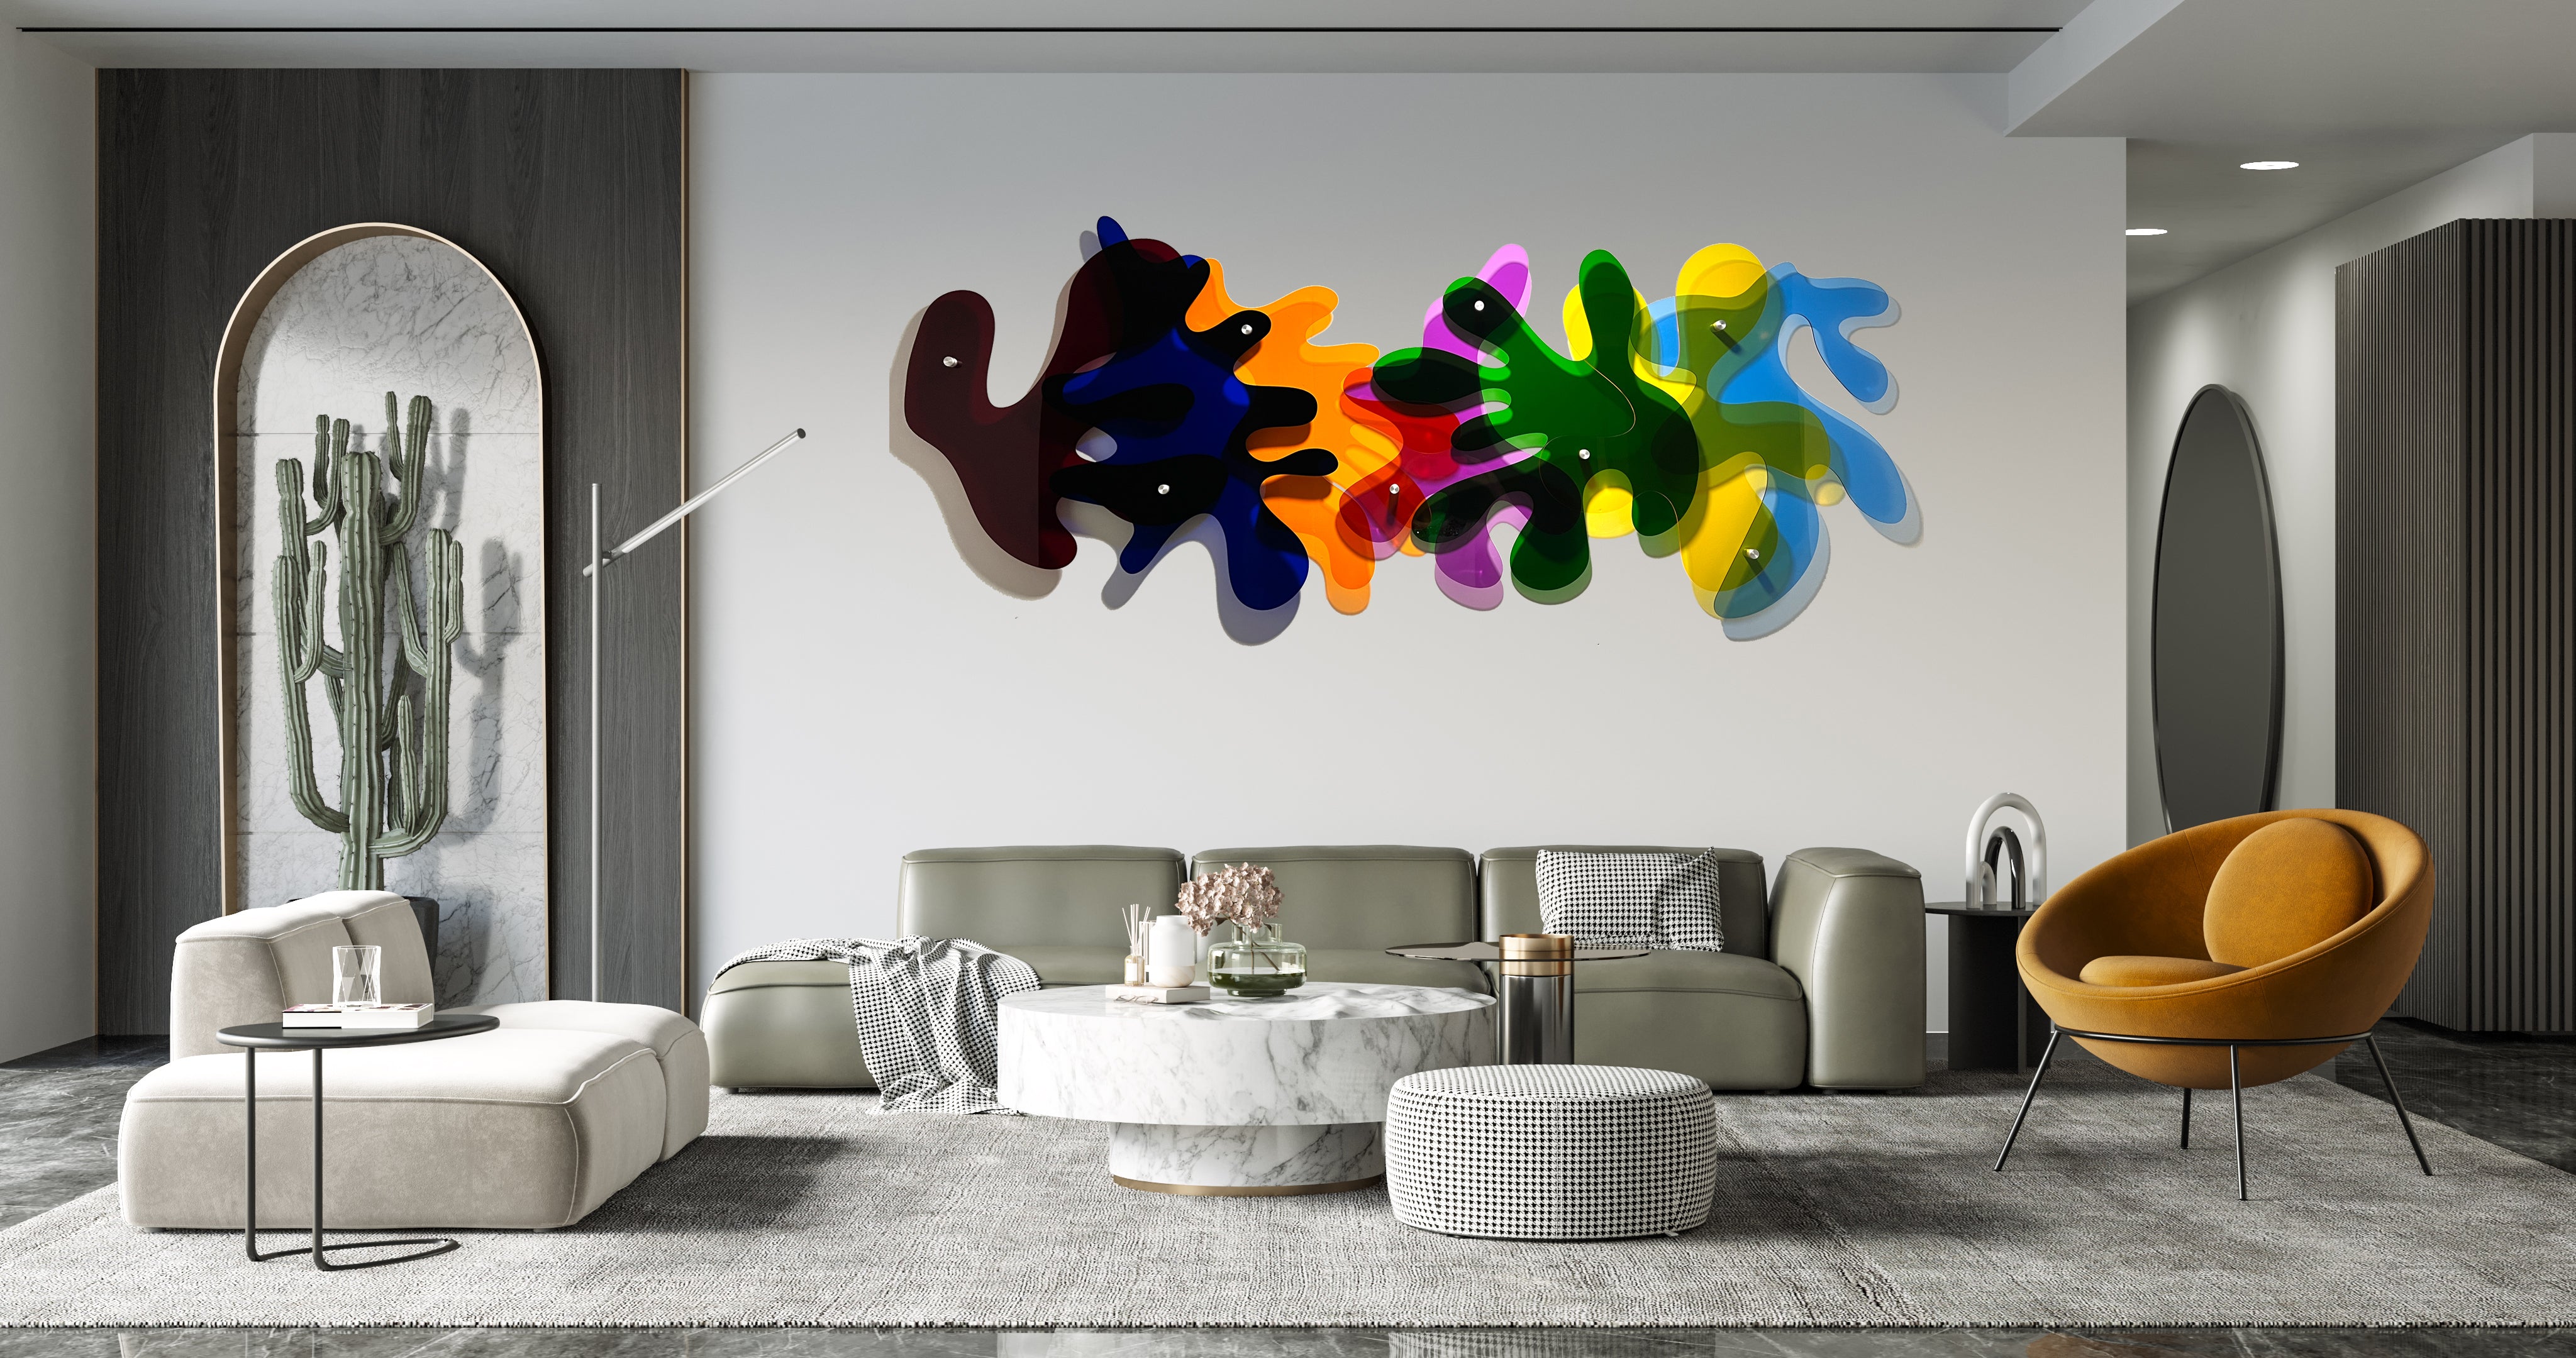 Be different - 3D Wall Art